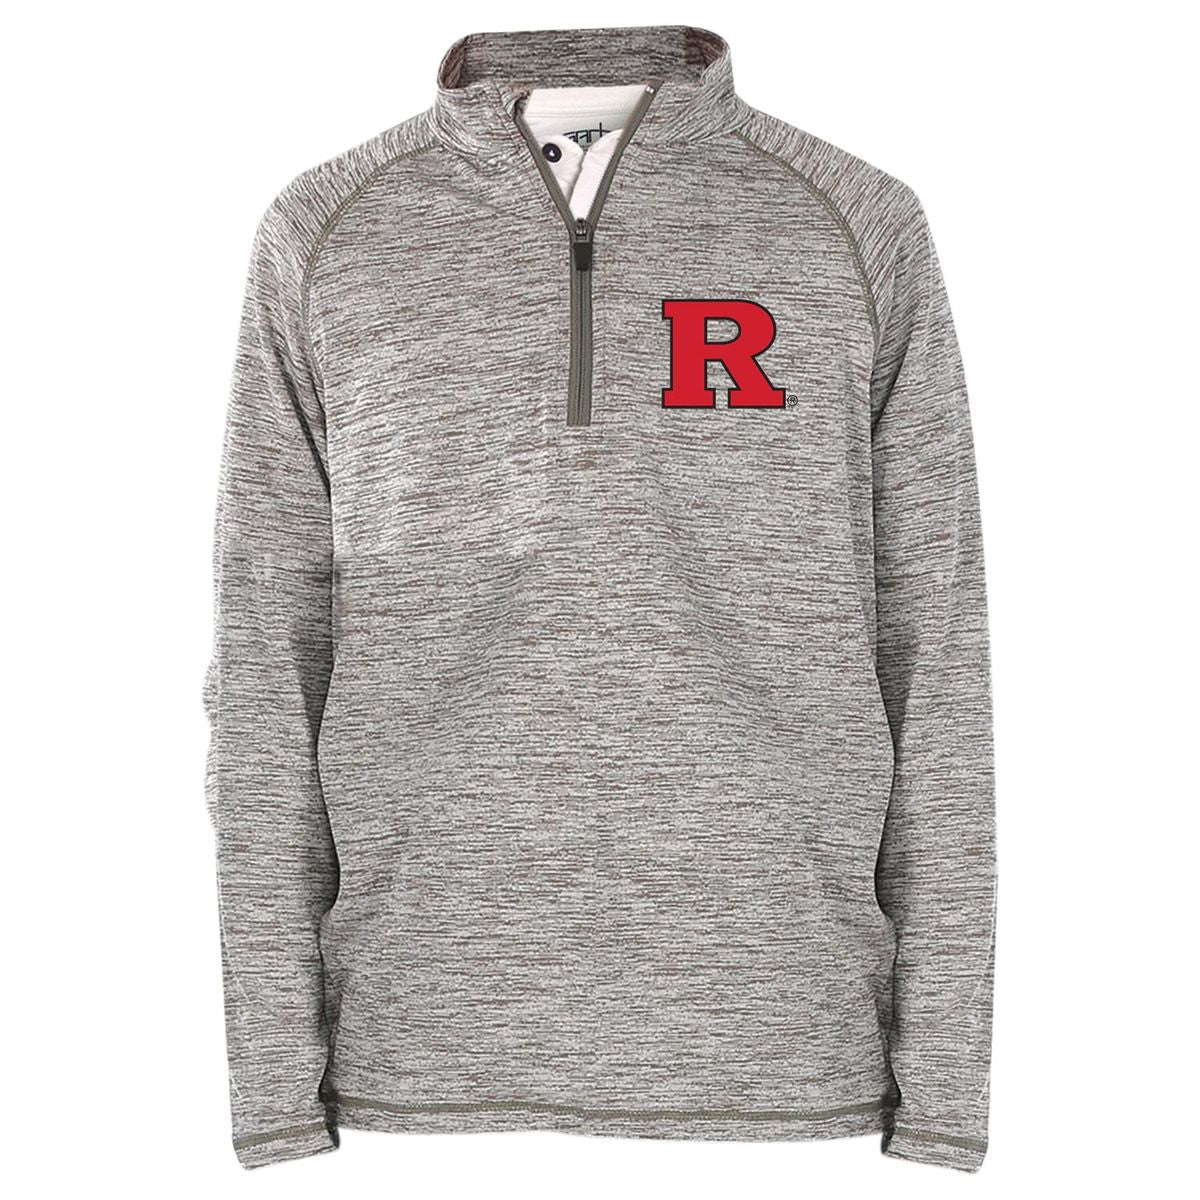 Rutgers Scarlet Knights Youth Boys' 1/4-Zip Pullover